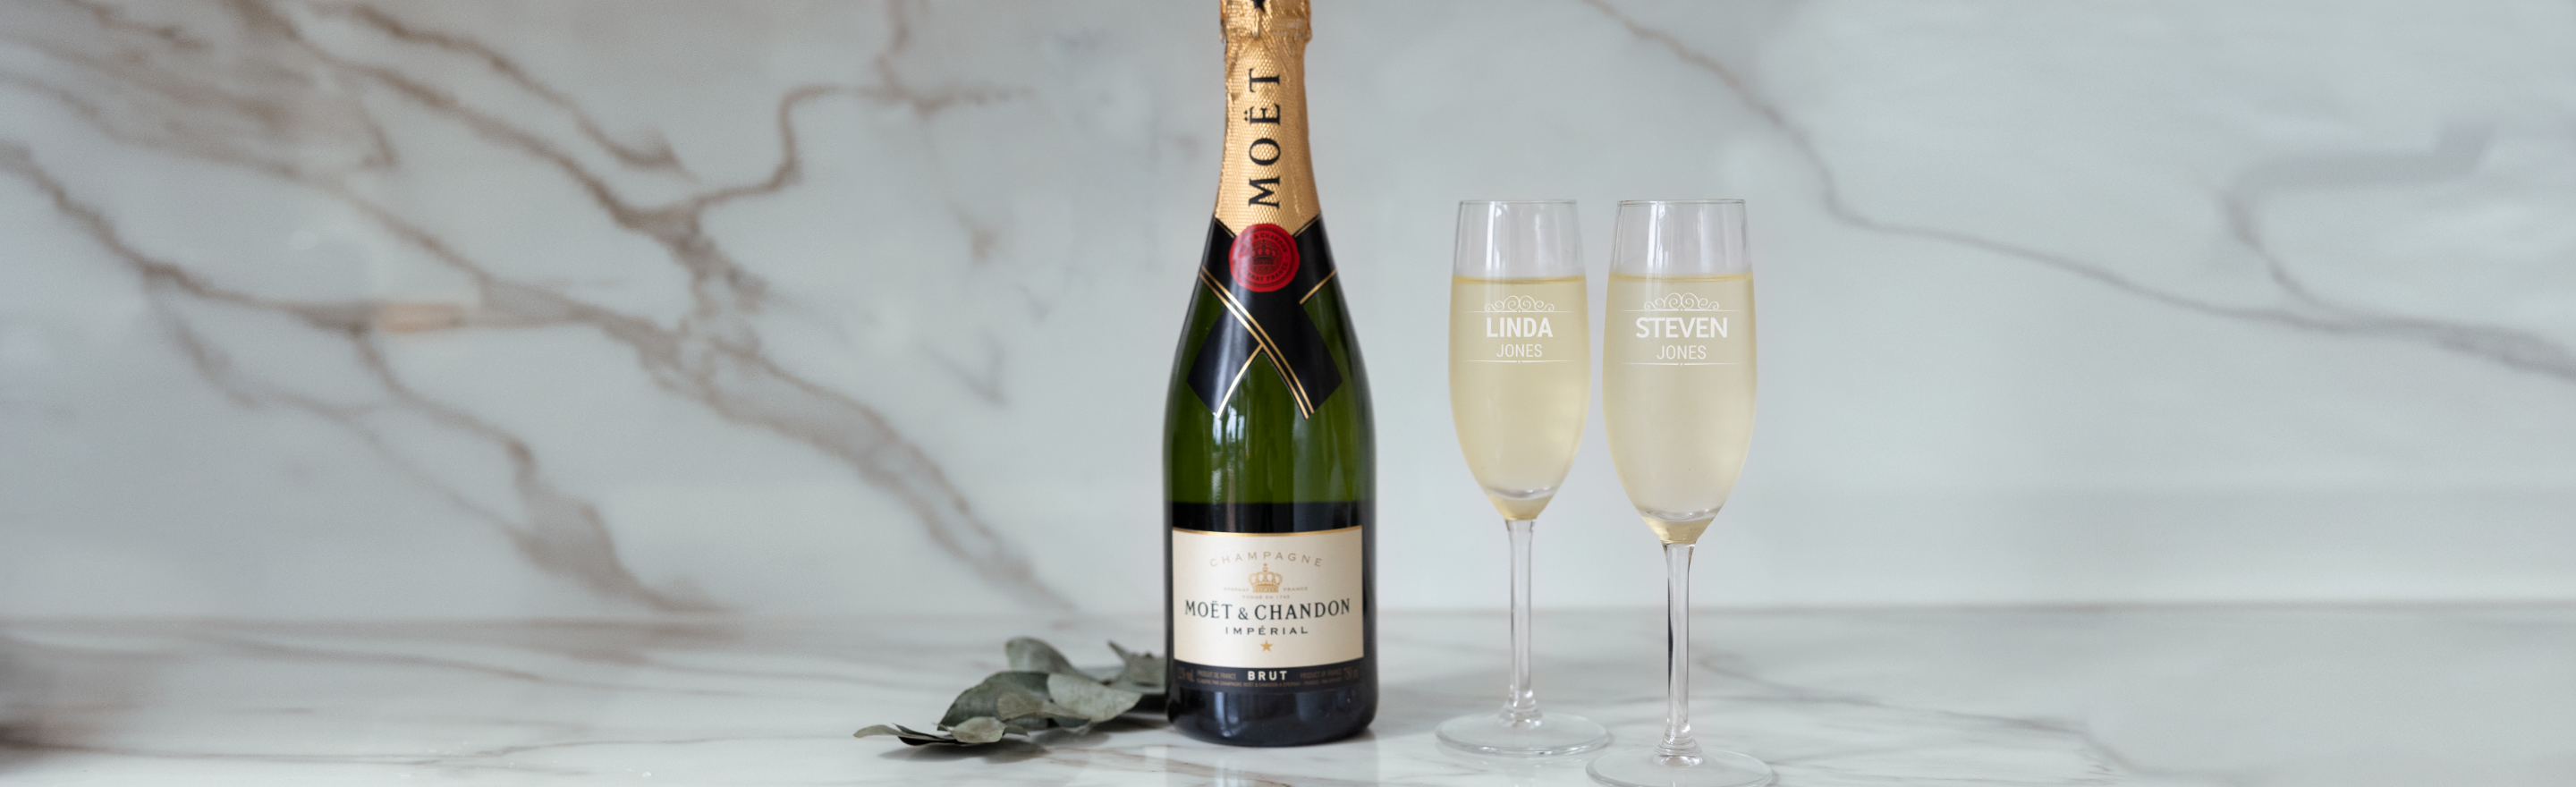 Create an unforgettable, personalised New Year’s Eve

